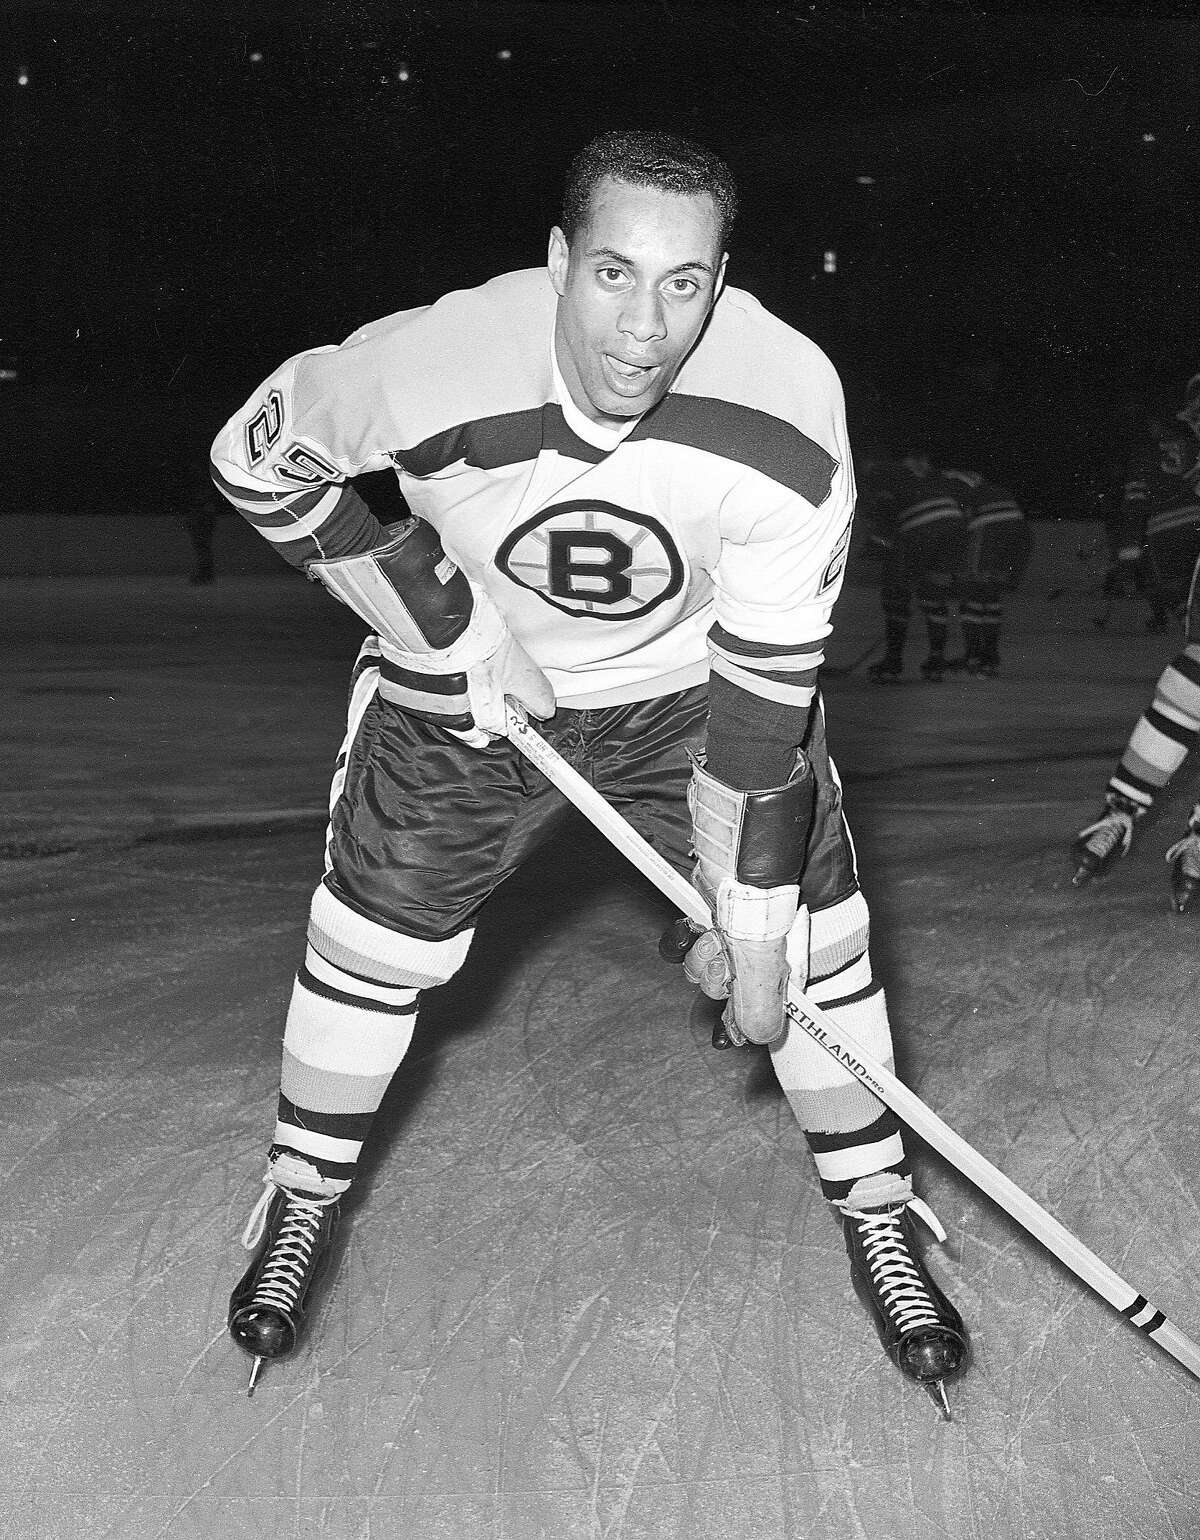 FILE - In this Nov. 23, 1960, file photo, 25-year-old left wing Willie O'Ree, the first black player of the National Hockey League, poses for a photo as he warms up in his Boston Bruins uniform prior to an NHL hockey game with the New York Rangers at New York's Madison Square Garden. O'Ree was selected to the Hockey Hall of Fame, Tuesday, June 26, 2018. (AP Photo, File)